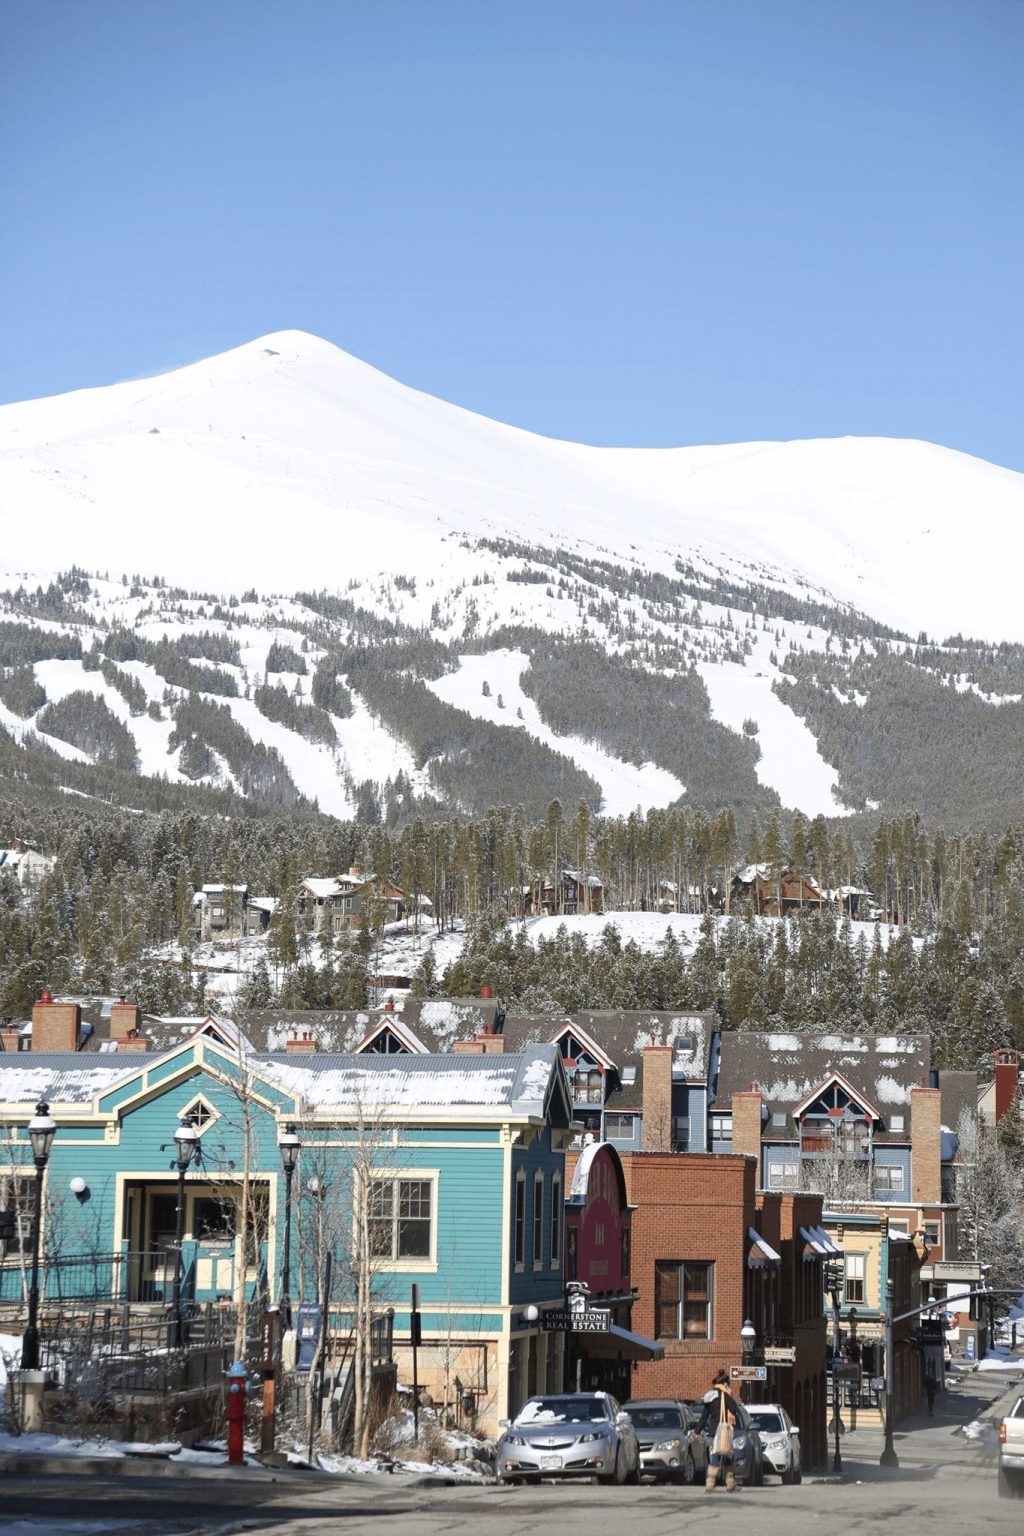 Springtime downtown and on the mountain in Breckenridge